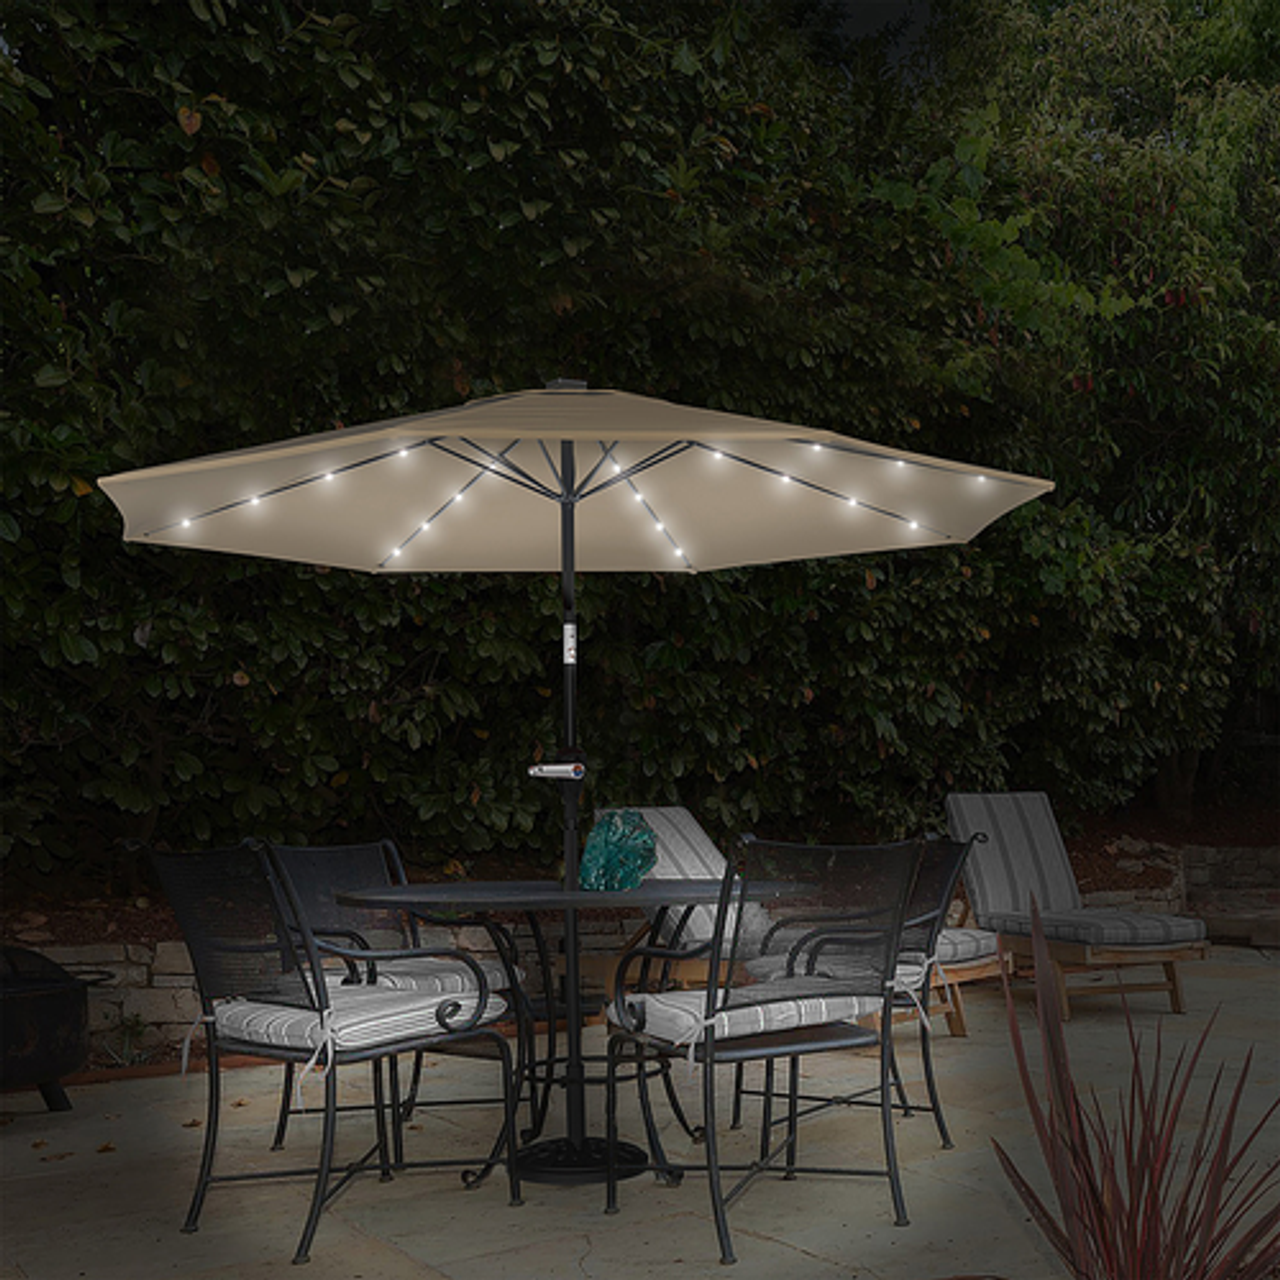 Nature Spring - Patio Umbrella – 10 Foot Deck Shade with Solar Powered LED Lights, Crank Tilt and Fade Resistant, UV Protection Canopy - Sand